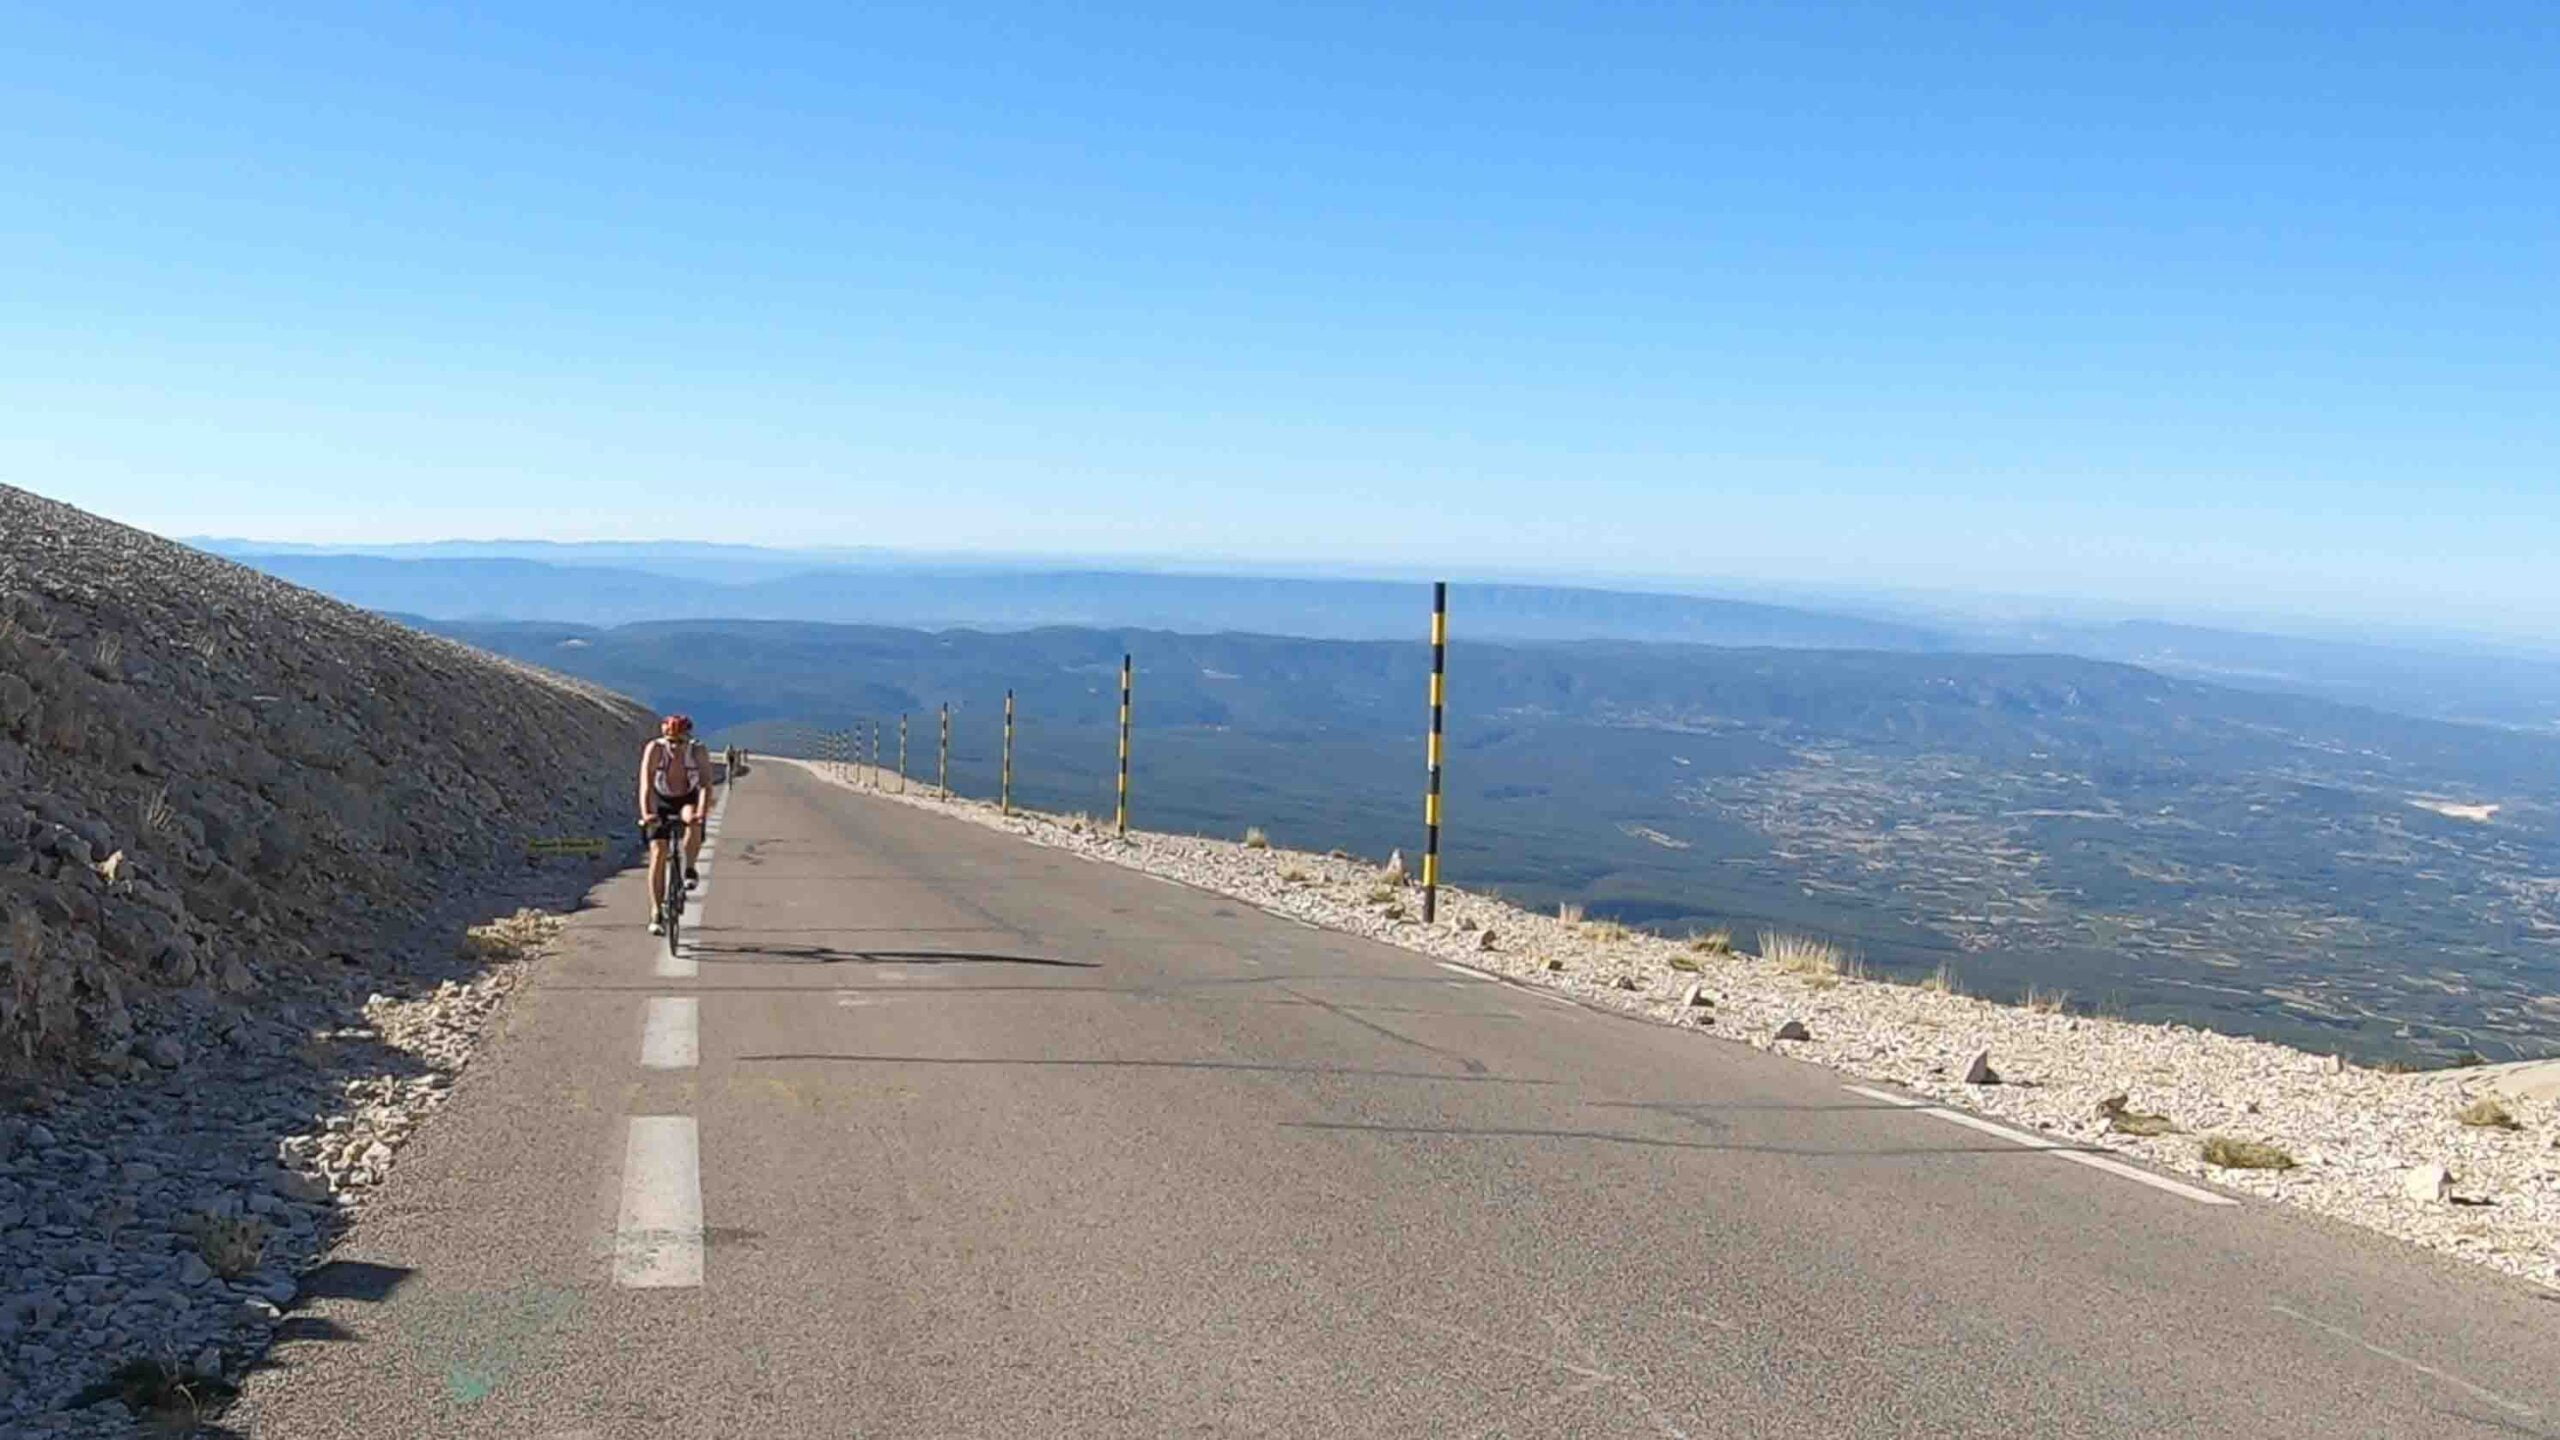 Spectacular views from the upper reaches of Ventoux's slopes